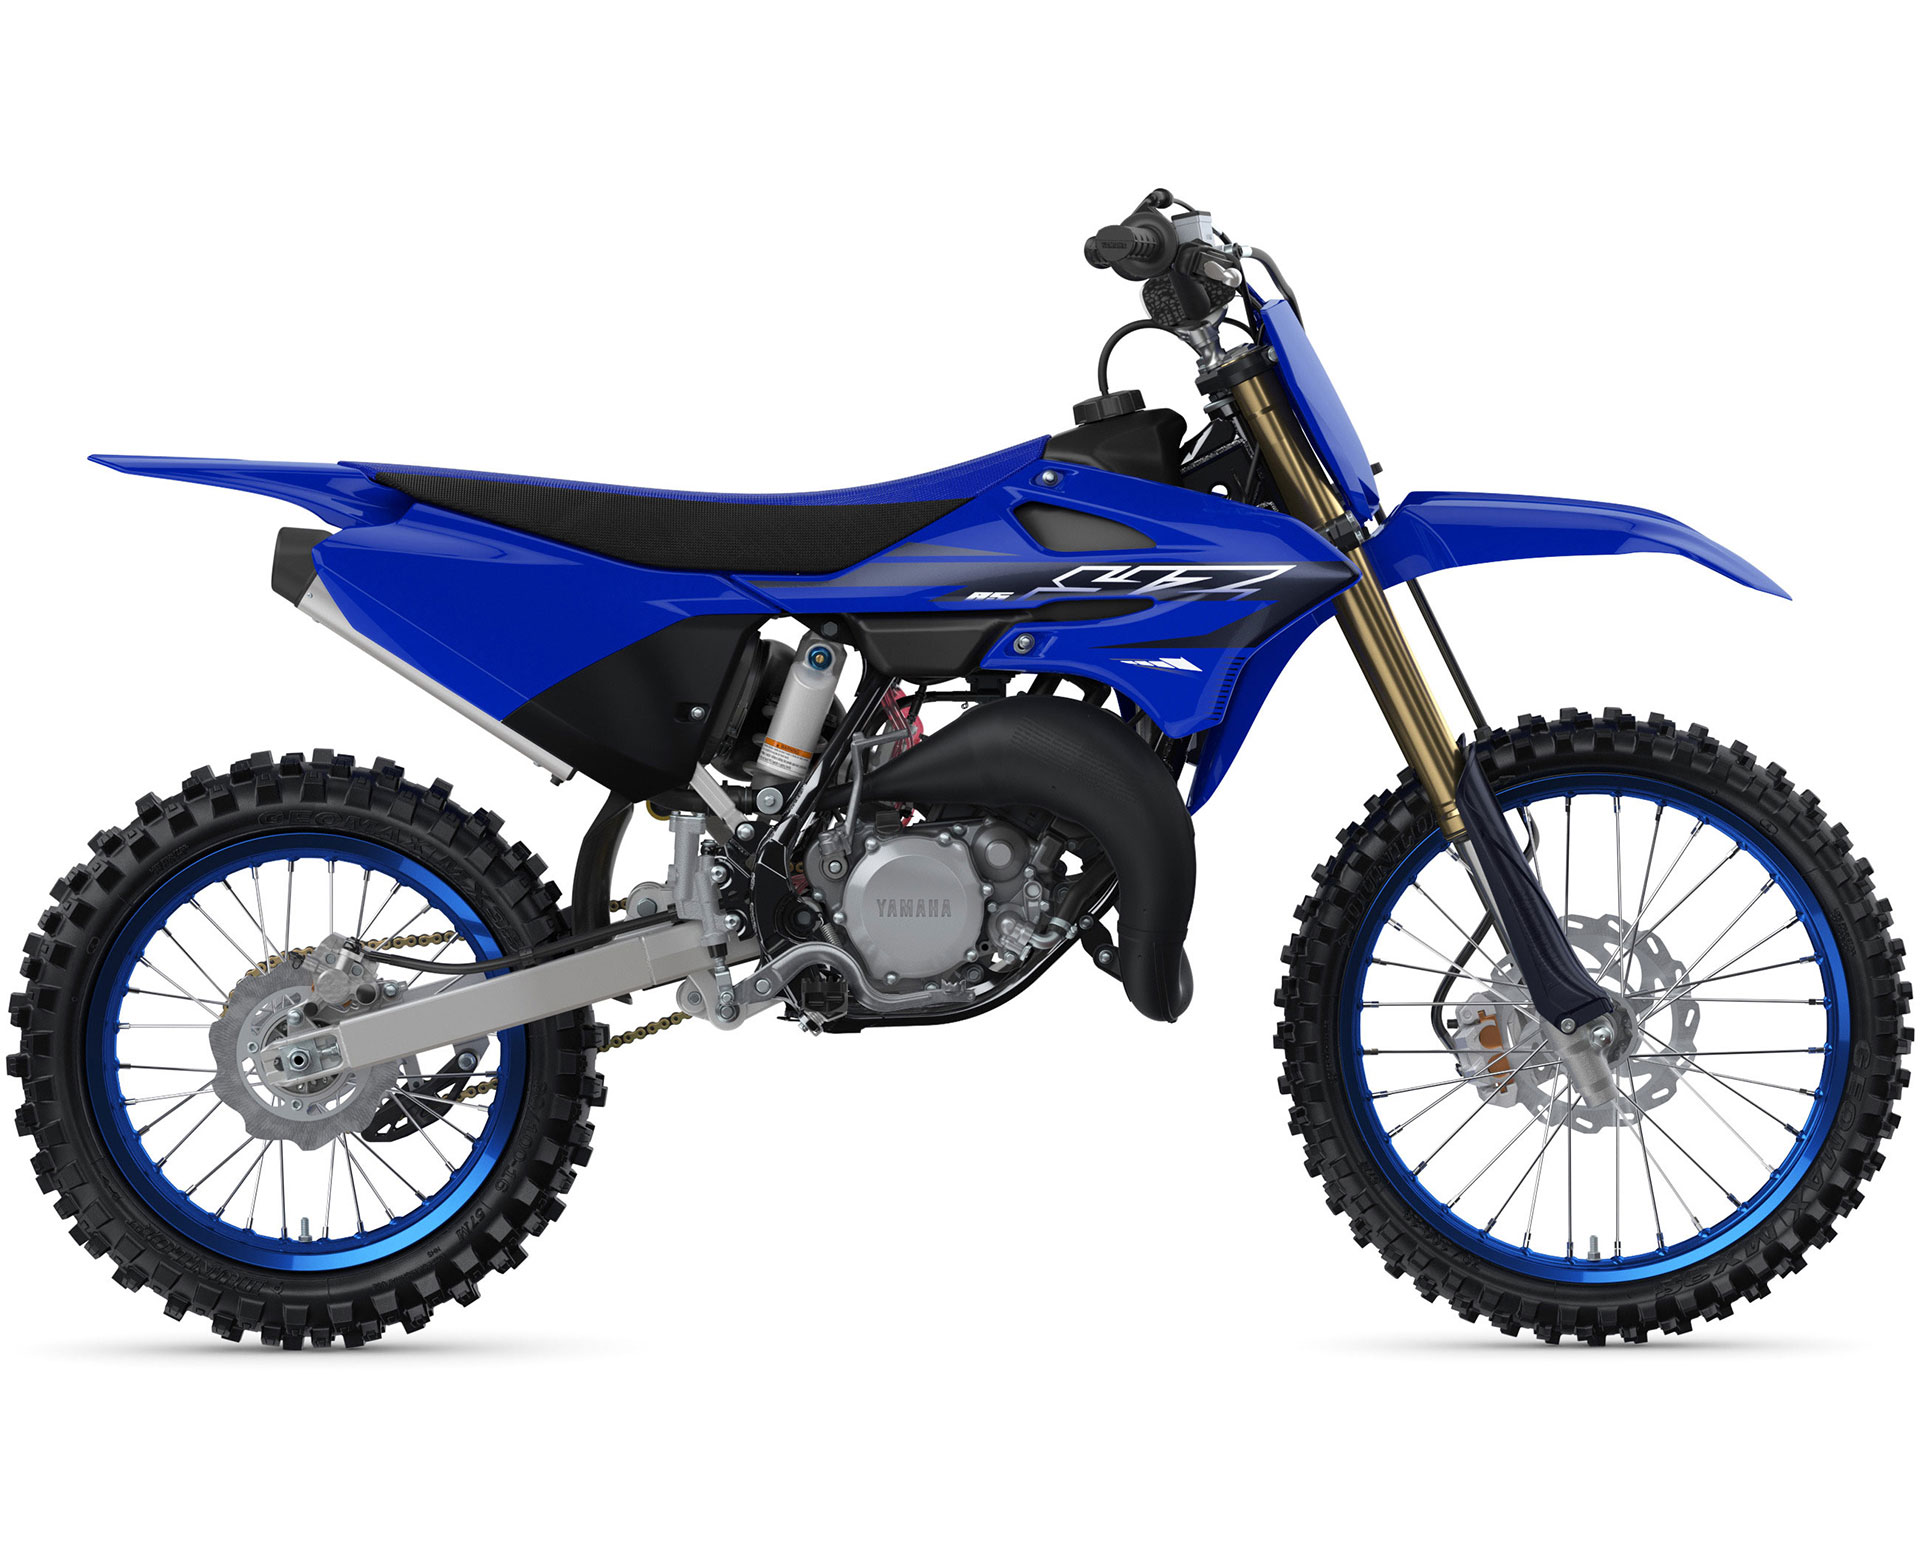 Thumbnail of your customized 2023 YZ85LW